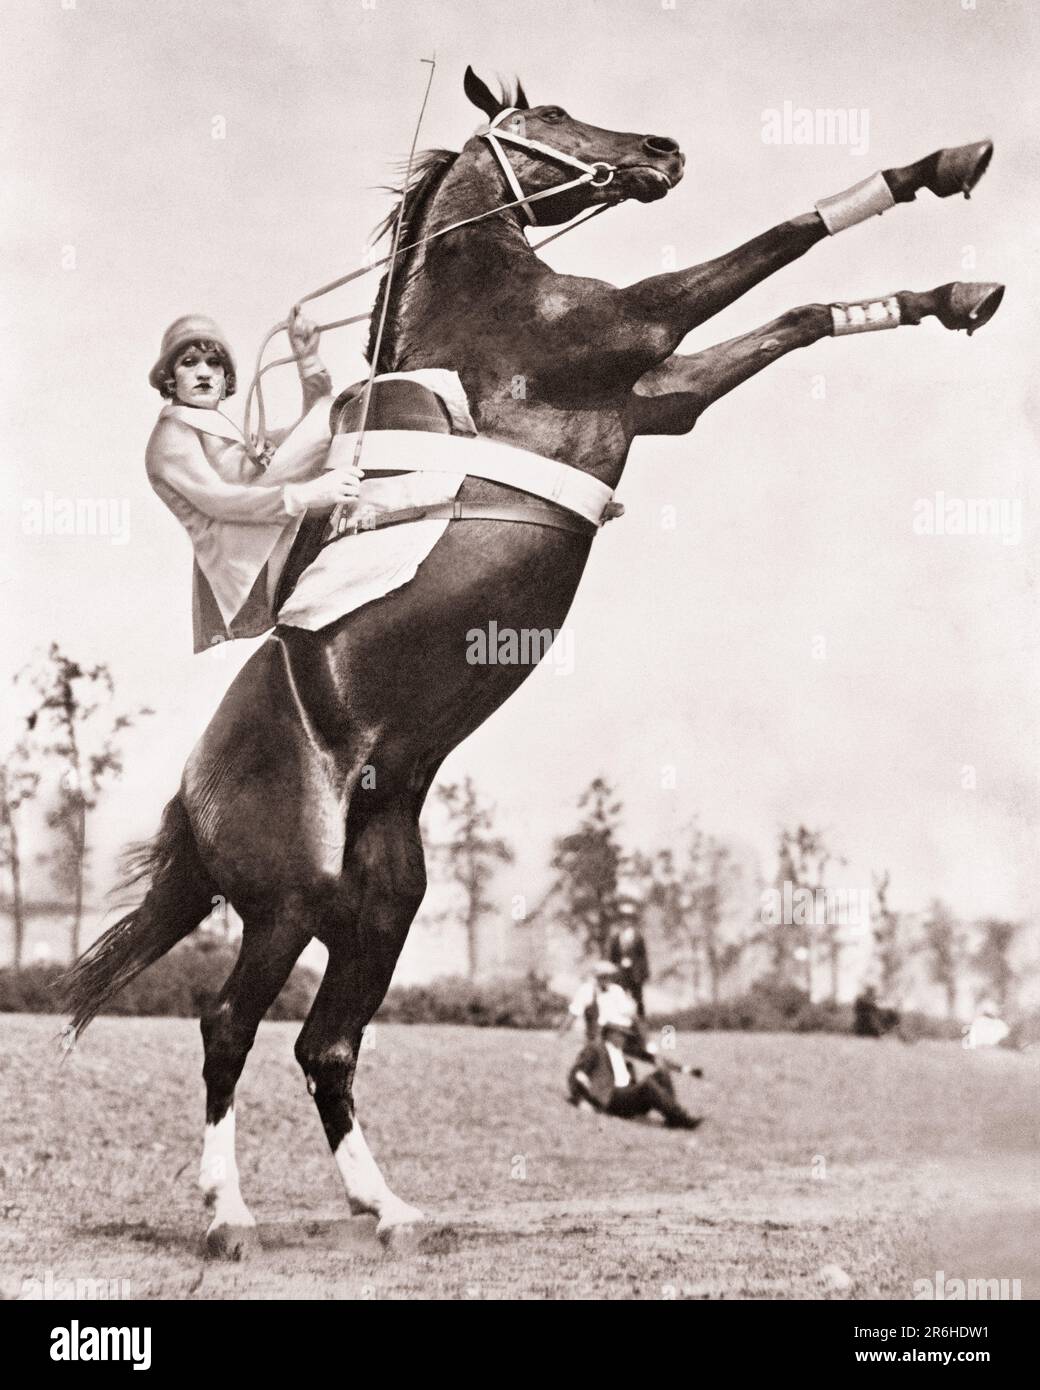 1920s WOMAN CIRCUS EQUESTRIAN LOOKING AT CAMERA RIDING SIDESADDLE ON LARGE REARING HORSE - q73249 CPC001 HARS PHYSICAL FITNESS PERSONS INSPIRATION DANGER RISK PROFESSION TRANSPORTATION B&W EYE CONTACT PERFORMING ARTS SKILL OCCUPATION SKILLS MAMMALS REARING DANGEROUS PERFORMER STRENGTH CAREERS EXCITEMENT LOW ANGLE POWERFUL RISKY AUTHORITY ENTERTAINER HAZARDOUS OCCUPATIONS PERIL ACTORS CIRCUS ACT JEOPARDY SIDESADDLE ENTERTAINERS MAMMAL MID-ADULT MID-ADULT WOMAN PERFORMERS BLACK AND WHITE CAUCASIAN ETHNICITY EQUESTRIAN OLD FASHIONED Stock Photo